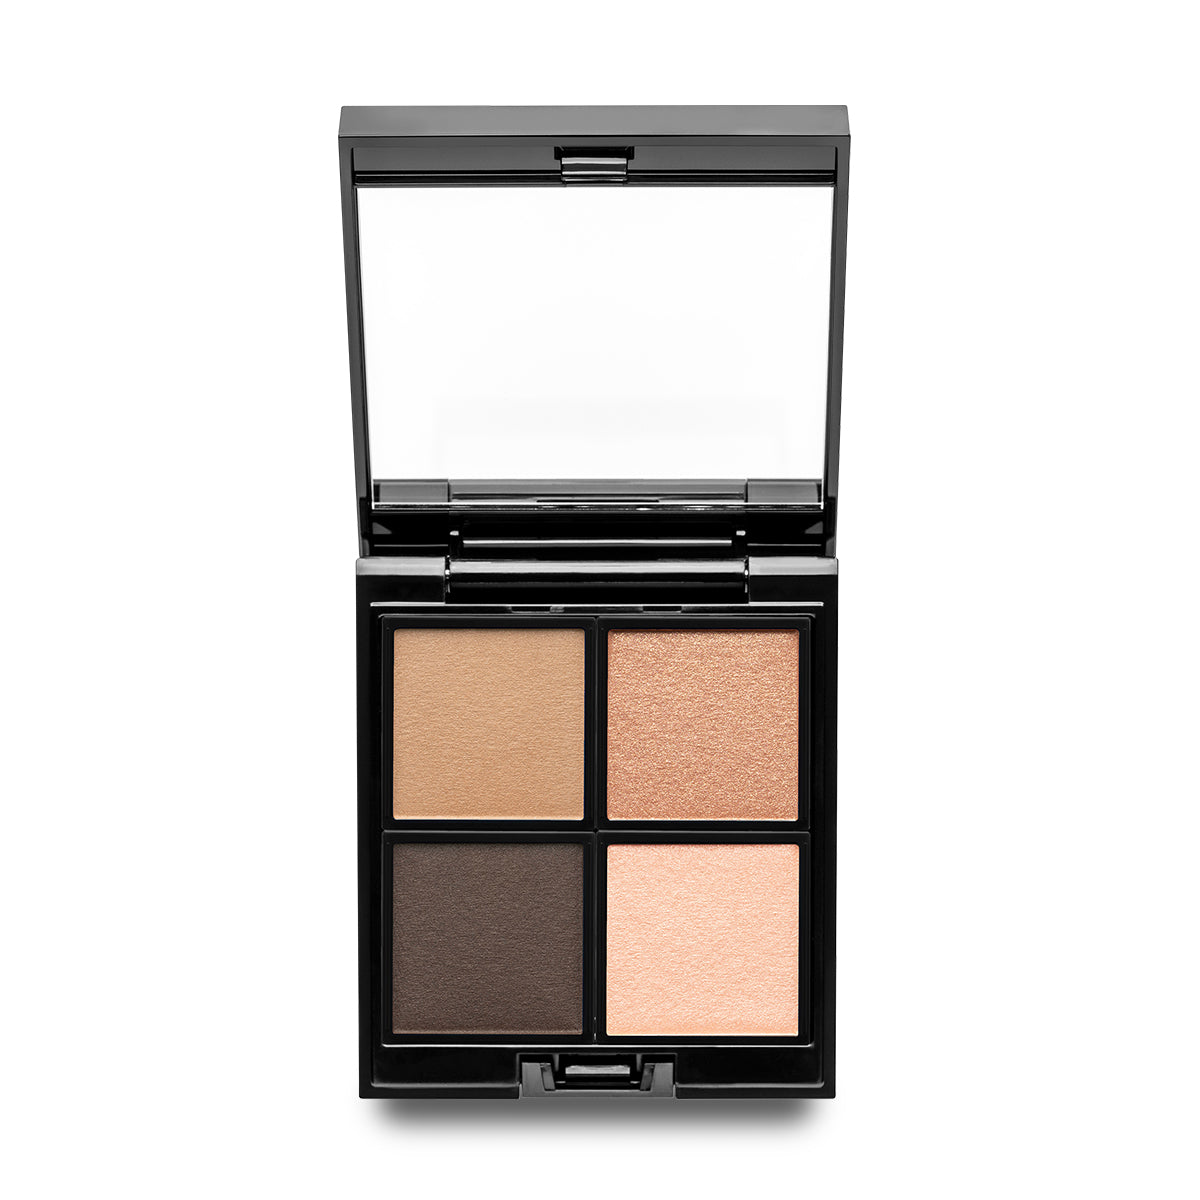 Beyond Beige - our most-requested eyeshadow palette